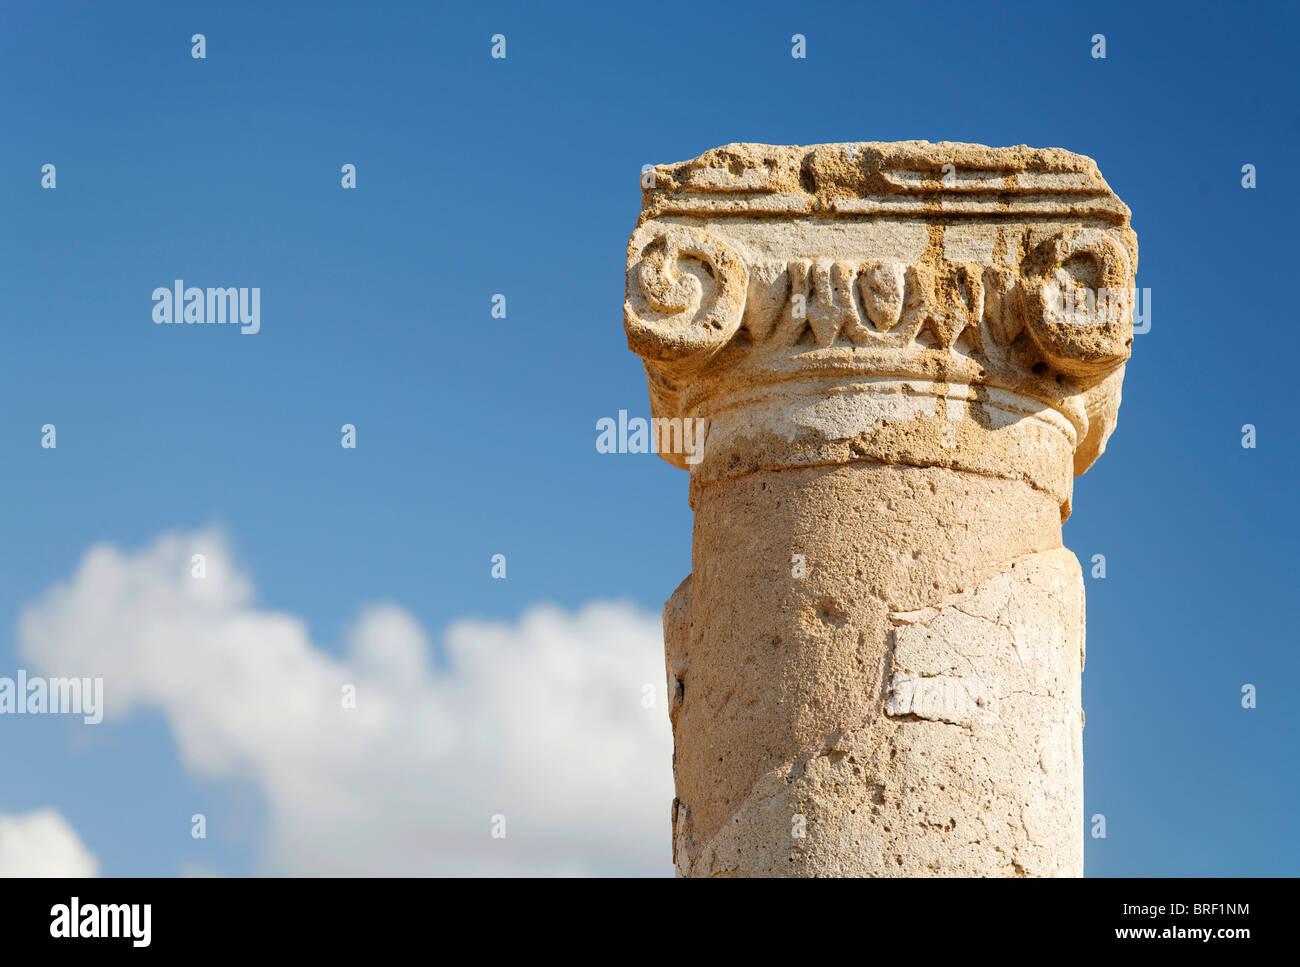 Ancient Greek column, capital, abacus, blue sky, white clouds, UNESCO World Heritage Site, Kato, Paphos, Pafos, Cyprus, Europe Stock Photo